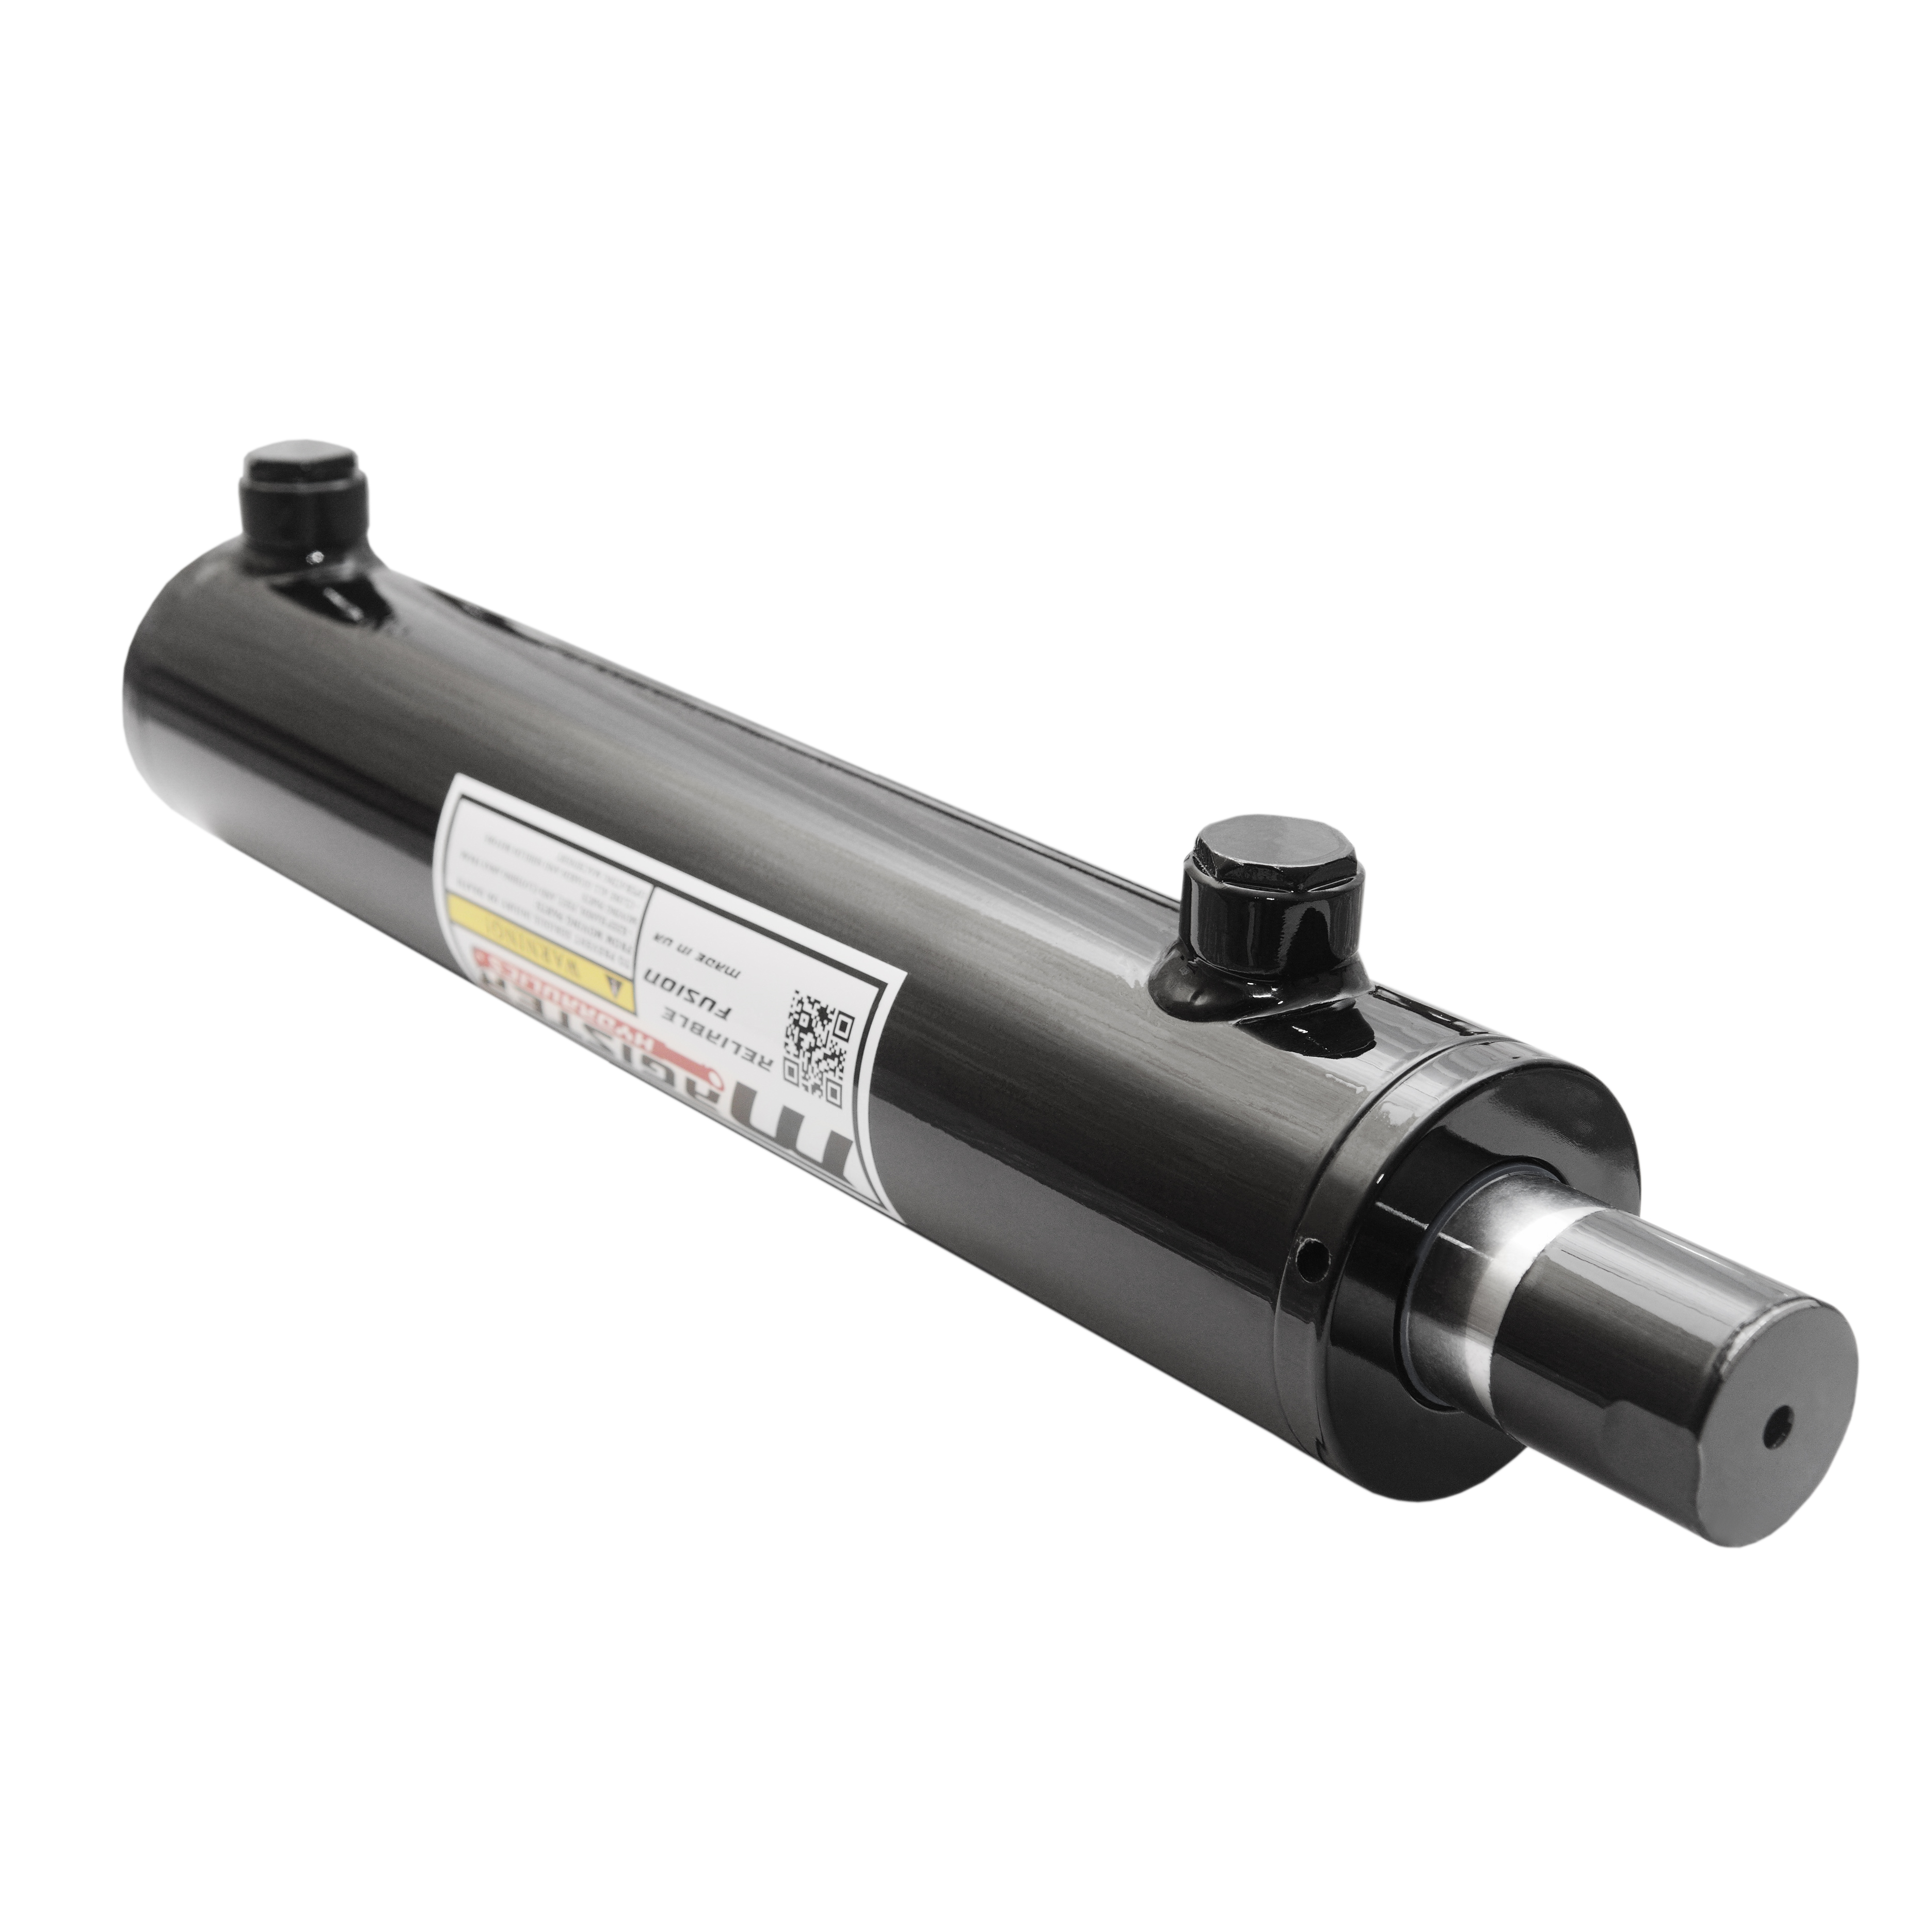 2 bore x 11 stroke hydraulic cylinder, welded universal double acting cylinder | Magister Hydraulics